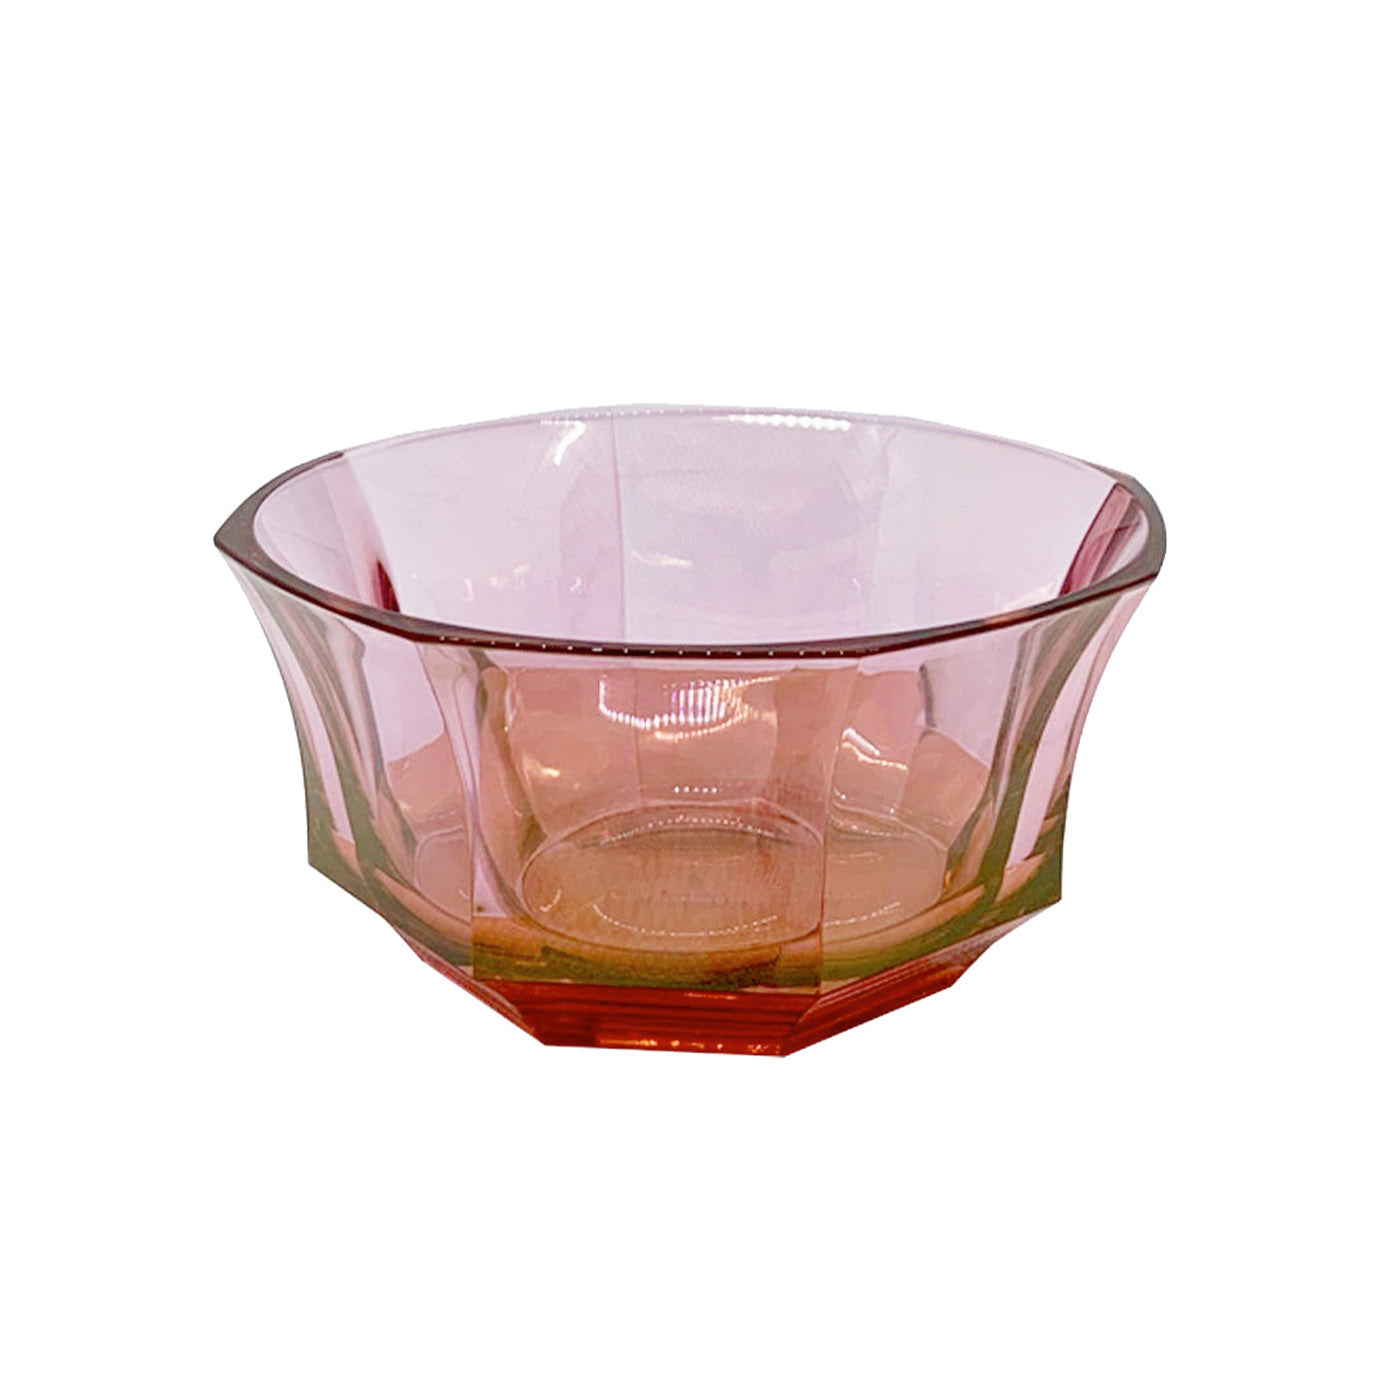 Faceted Red-To-Pink Crystal Dessert Bowl - Alternative view 1